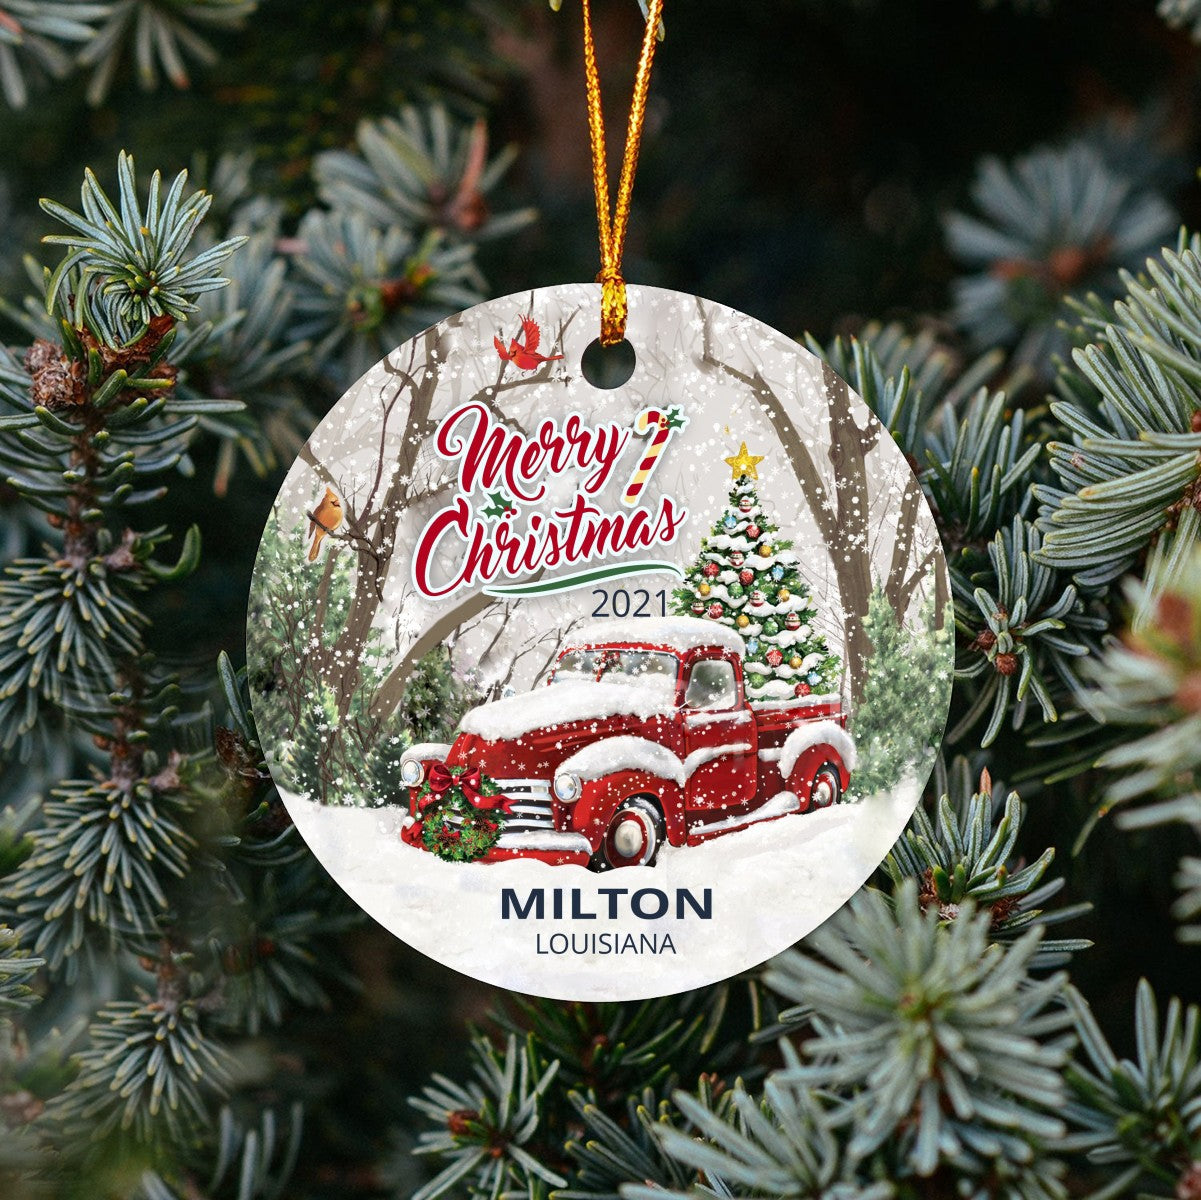 Christmas Tree Ornaments Milton - Ornament With Name City, State Milton Louisiana LA Ornament - Red Truck Xmas Ornaments 3'' Plastic Gift For Family, Friend And Housewarming